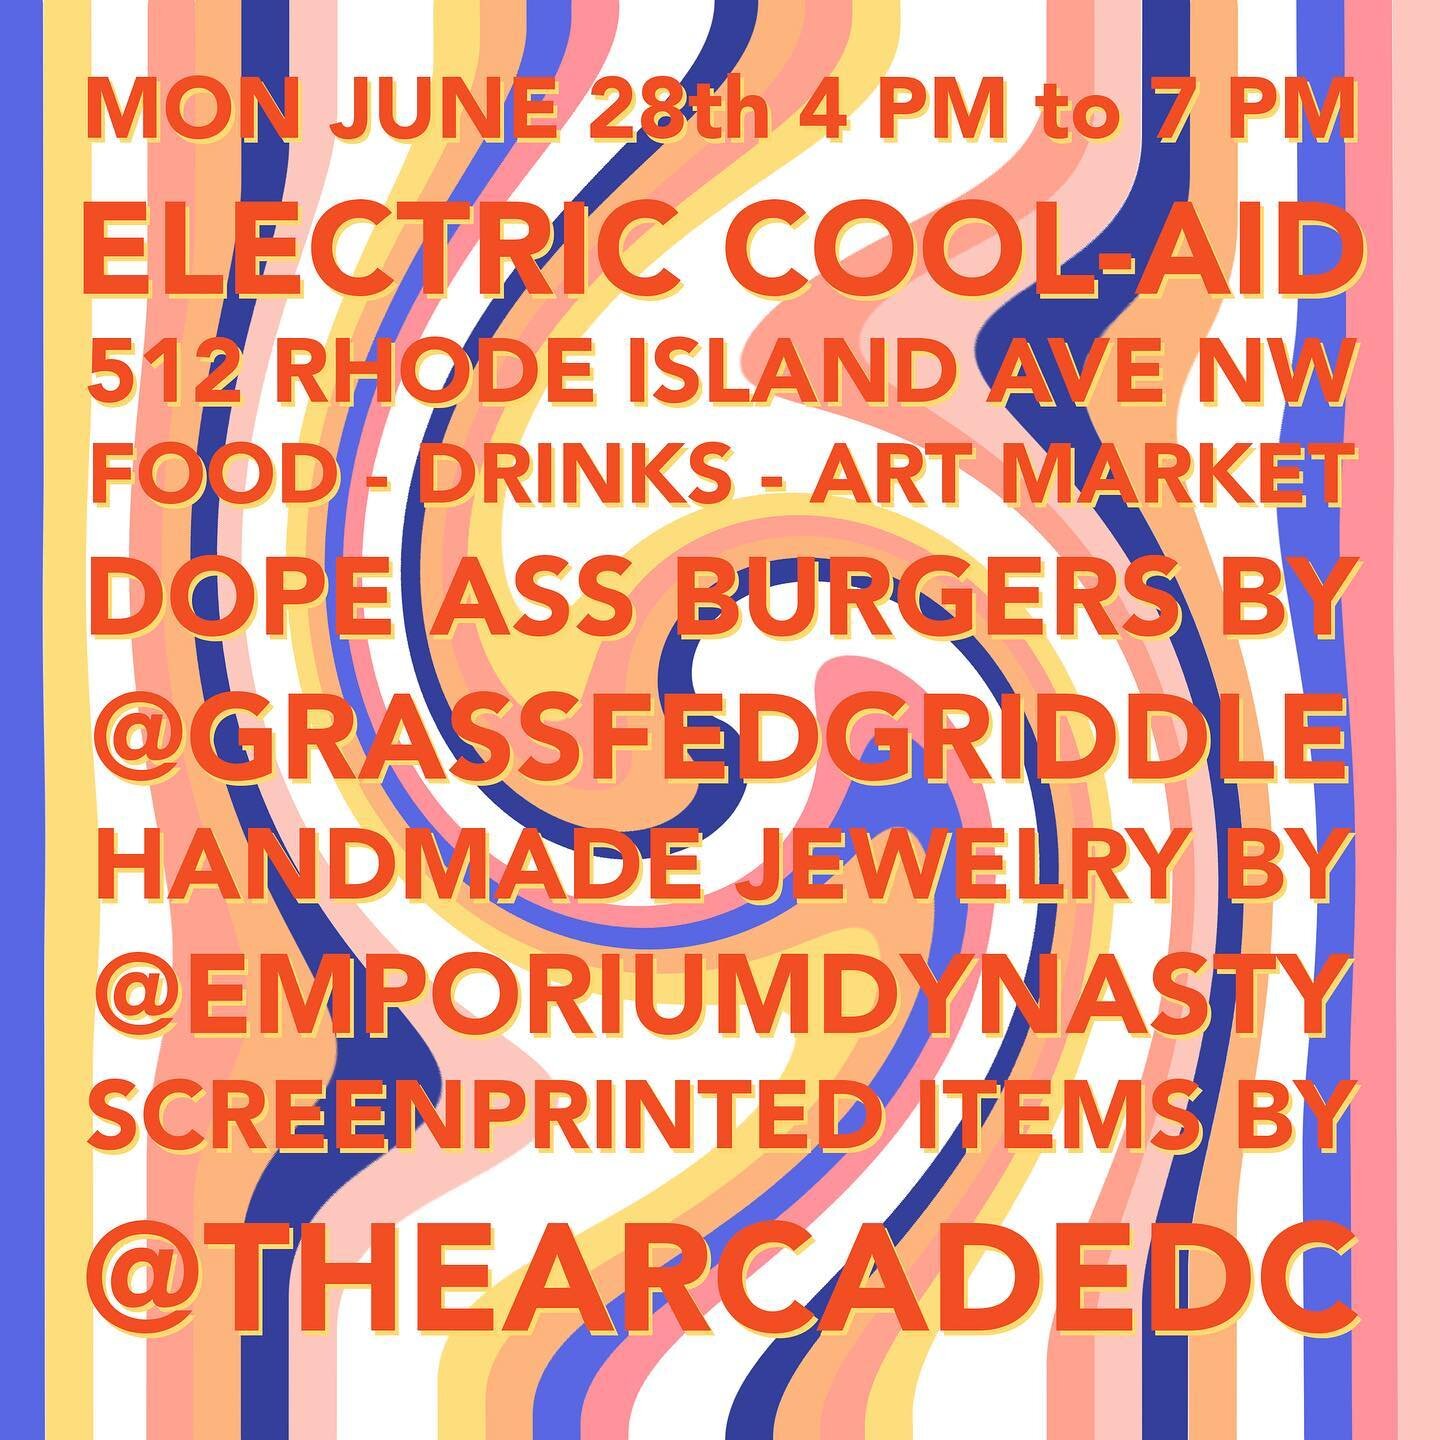 T O D A Y !

We&rsquo;ll be selling our wares at Electric Cool-Aid (512 Rhode Island Ave NW) from 4pm to 7pm. 

I&rsquo;ll have hand screen printed bandanas, Magicicada tees and limited edition Cicada Baby onesies, buddy books, prints, posters and mo